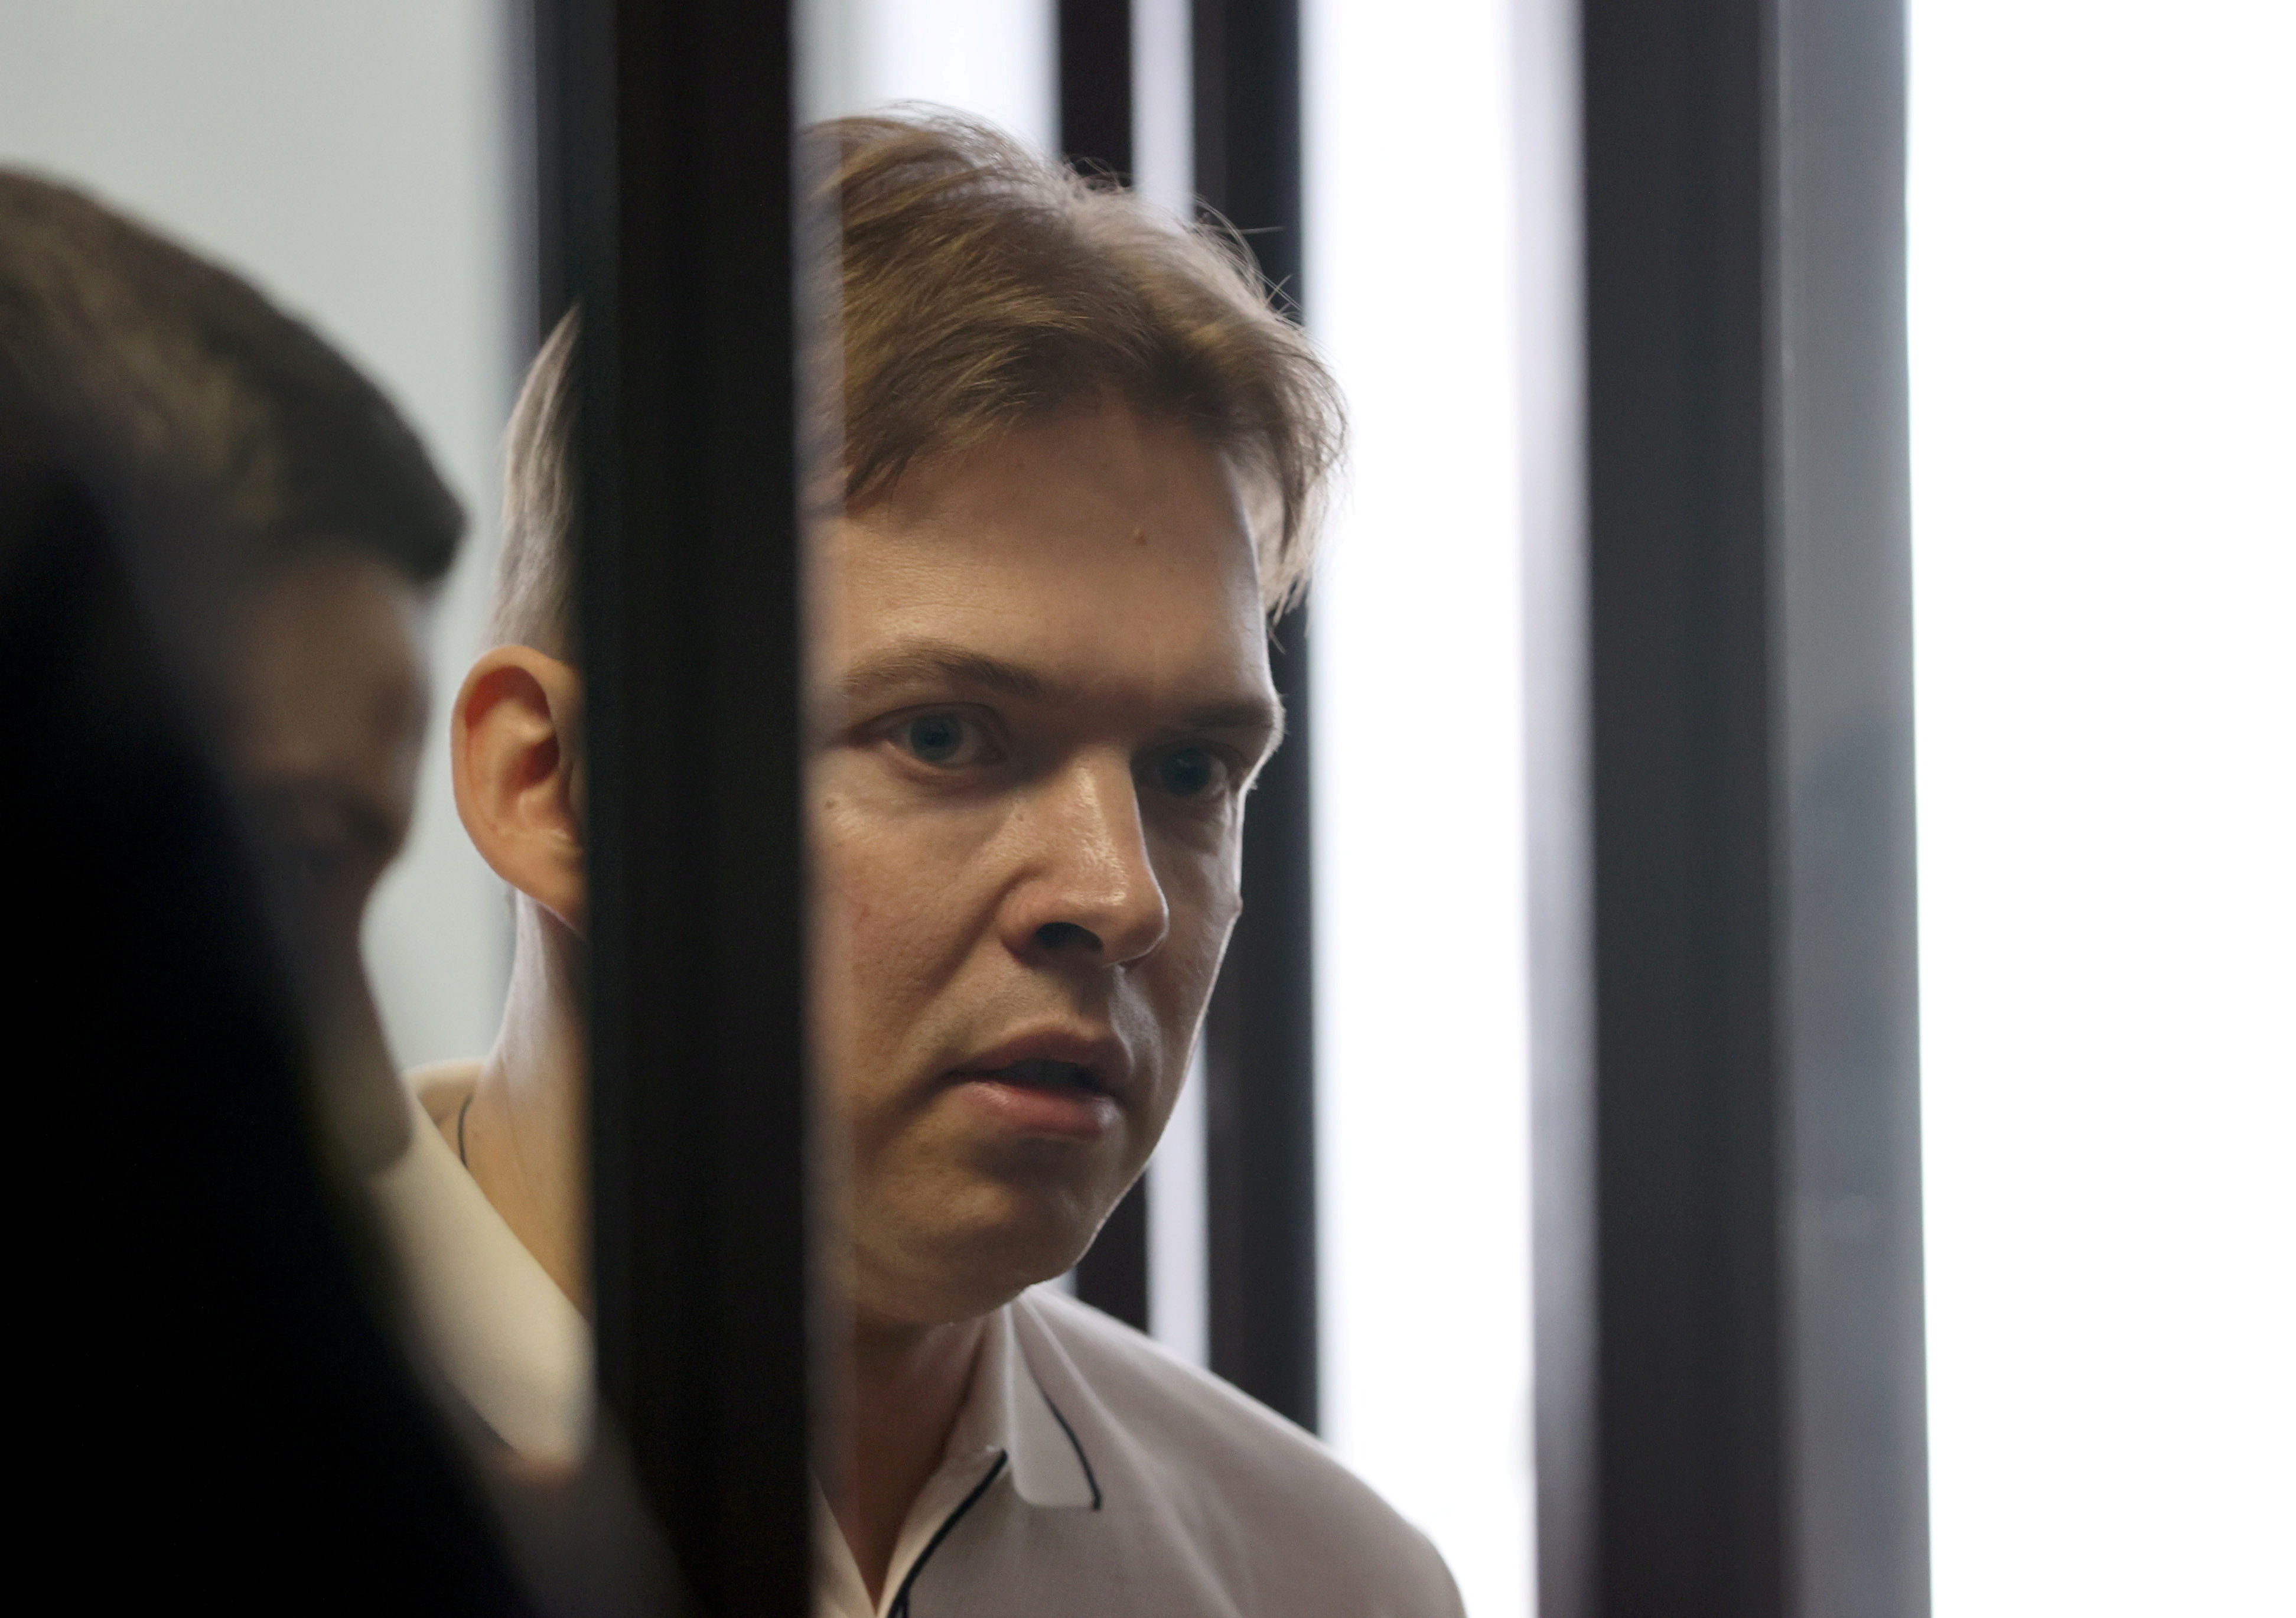 Belarusian opposition politician Maxim Znak, charged of plotting to seize power and threatening national security, attends a court hearing in Minsk, Belarus August 4, 2021. Ramil Nasibulin/BelTA/Handout via REUTERS